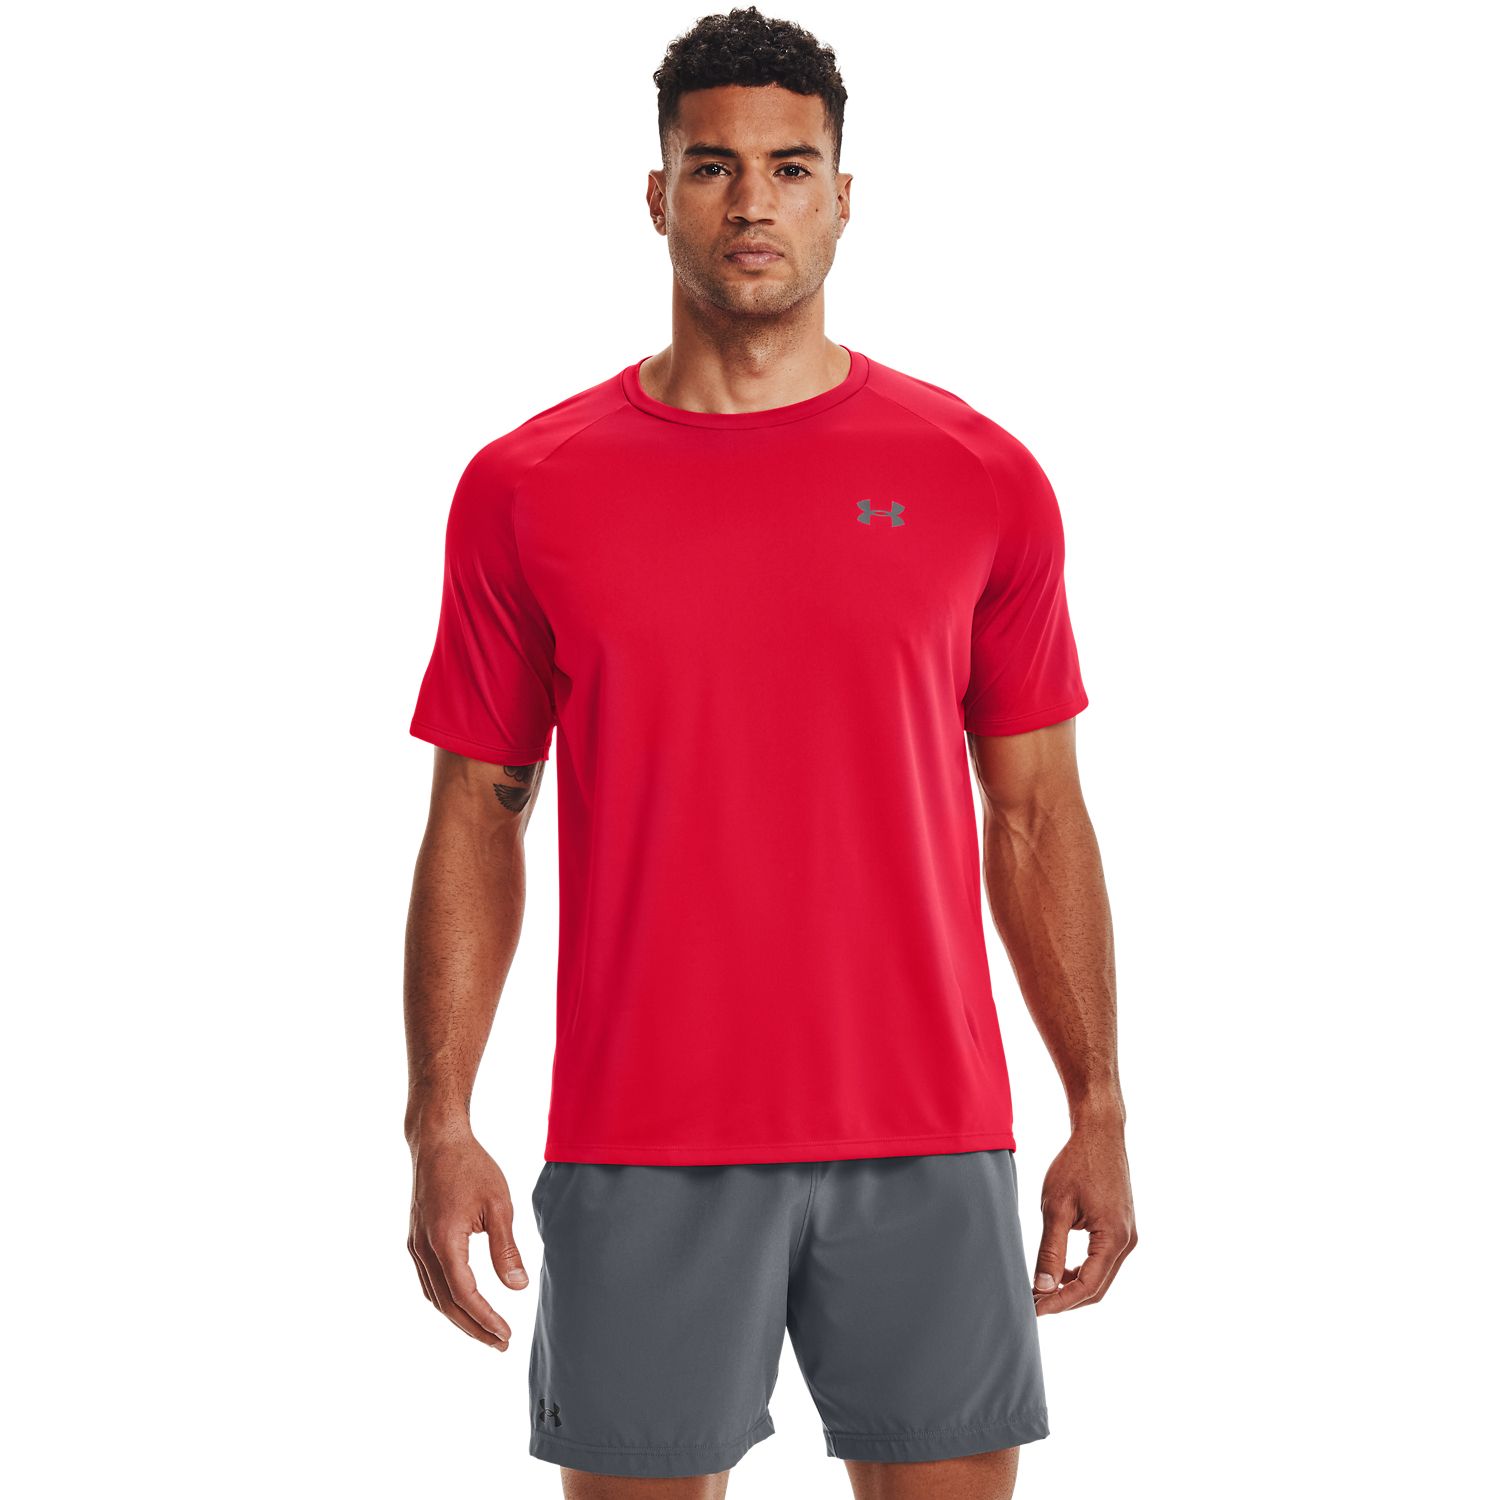 red under armour tshirt